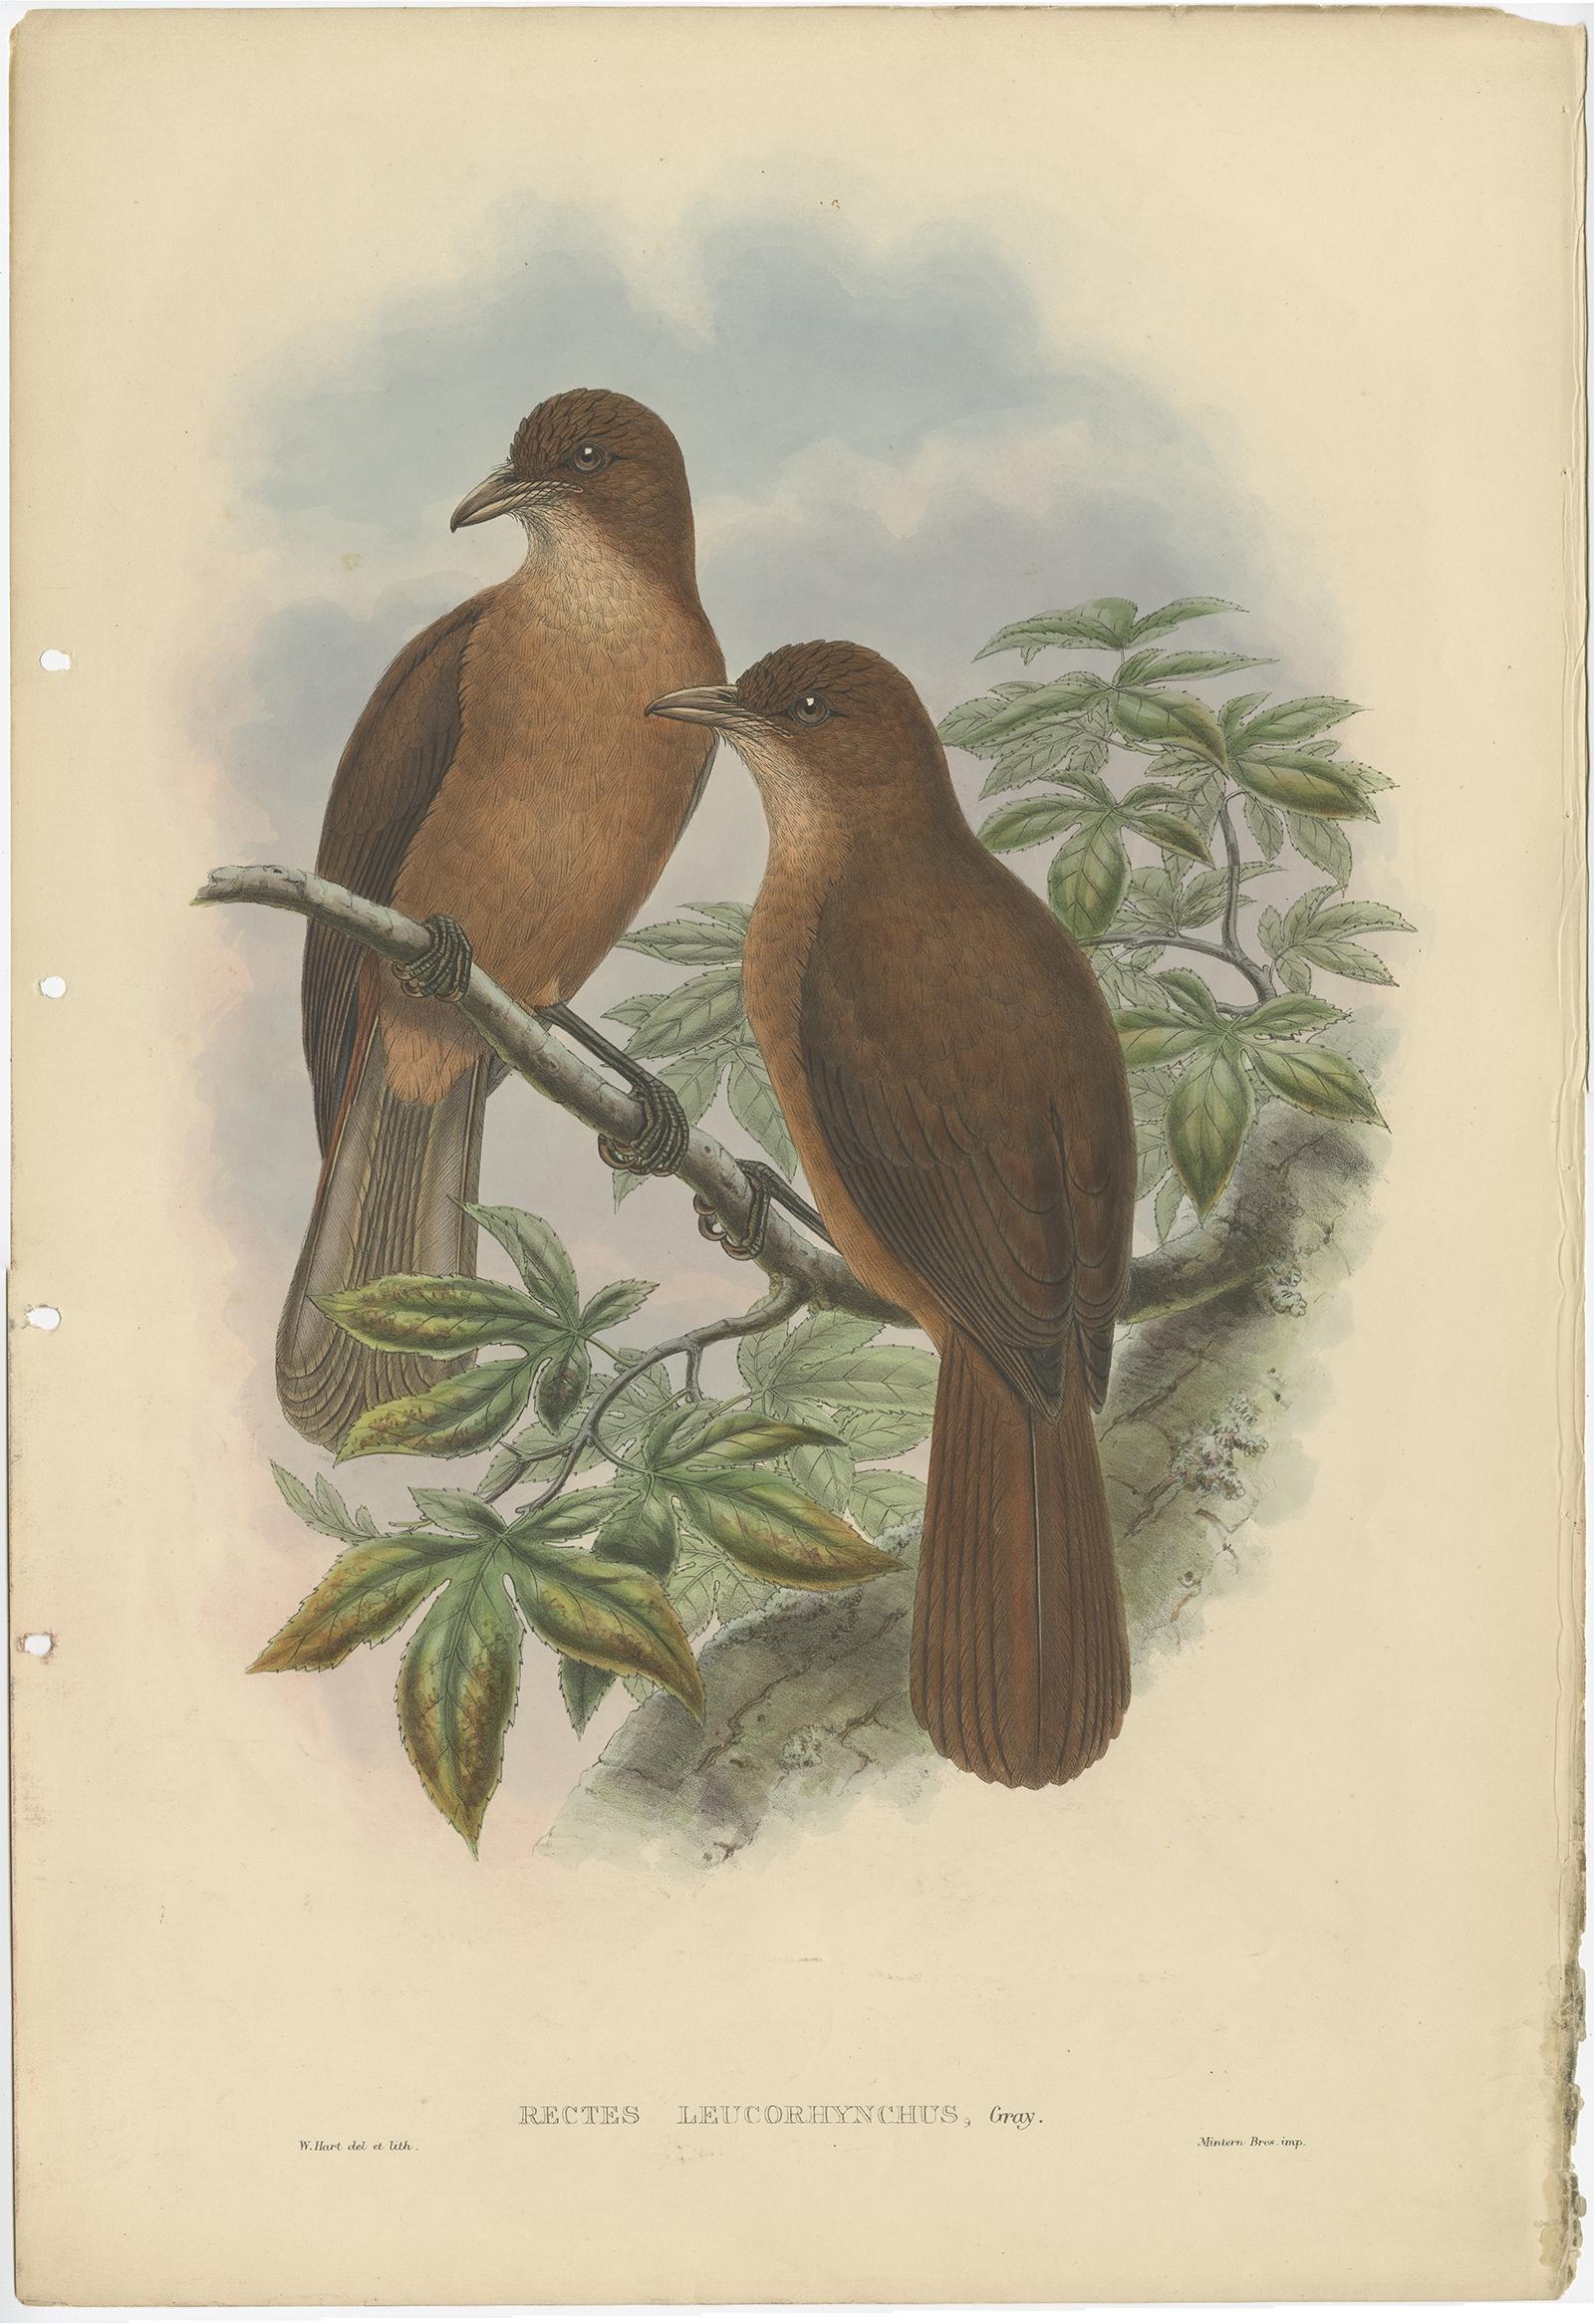 Antique bird print titled 'Rectes Leucorhynchus'. 

This print depicts the White-billed Wood-Shrike. Originates from John Gould's 'Birds of New Guinea and the adjacent Papuan Islands' published 1875-1888. 

Artists and Engravers: John Gould